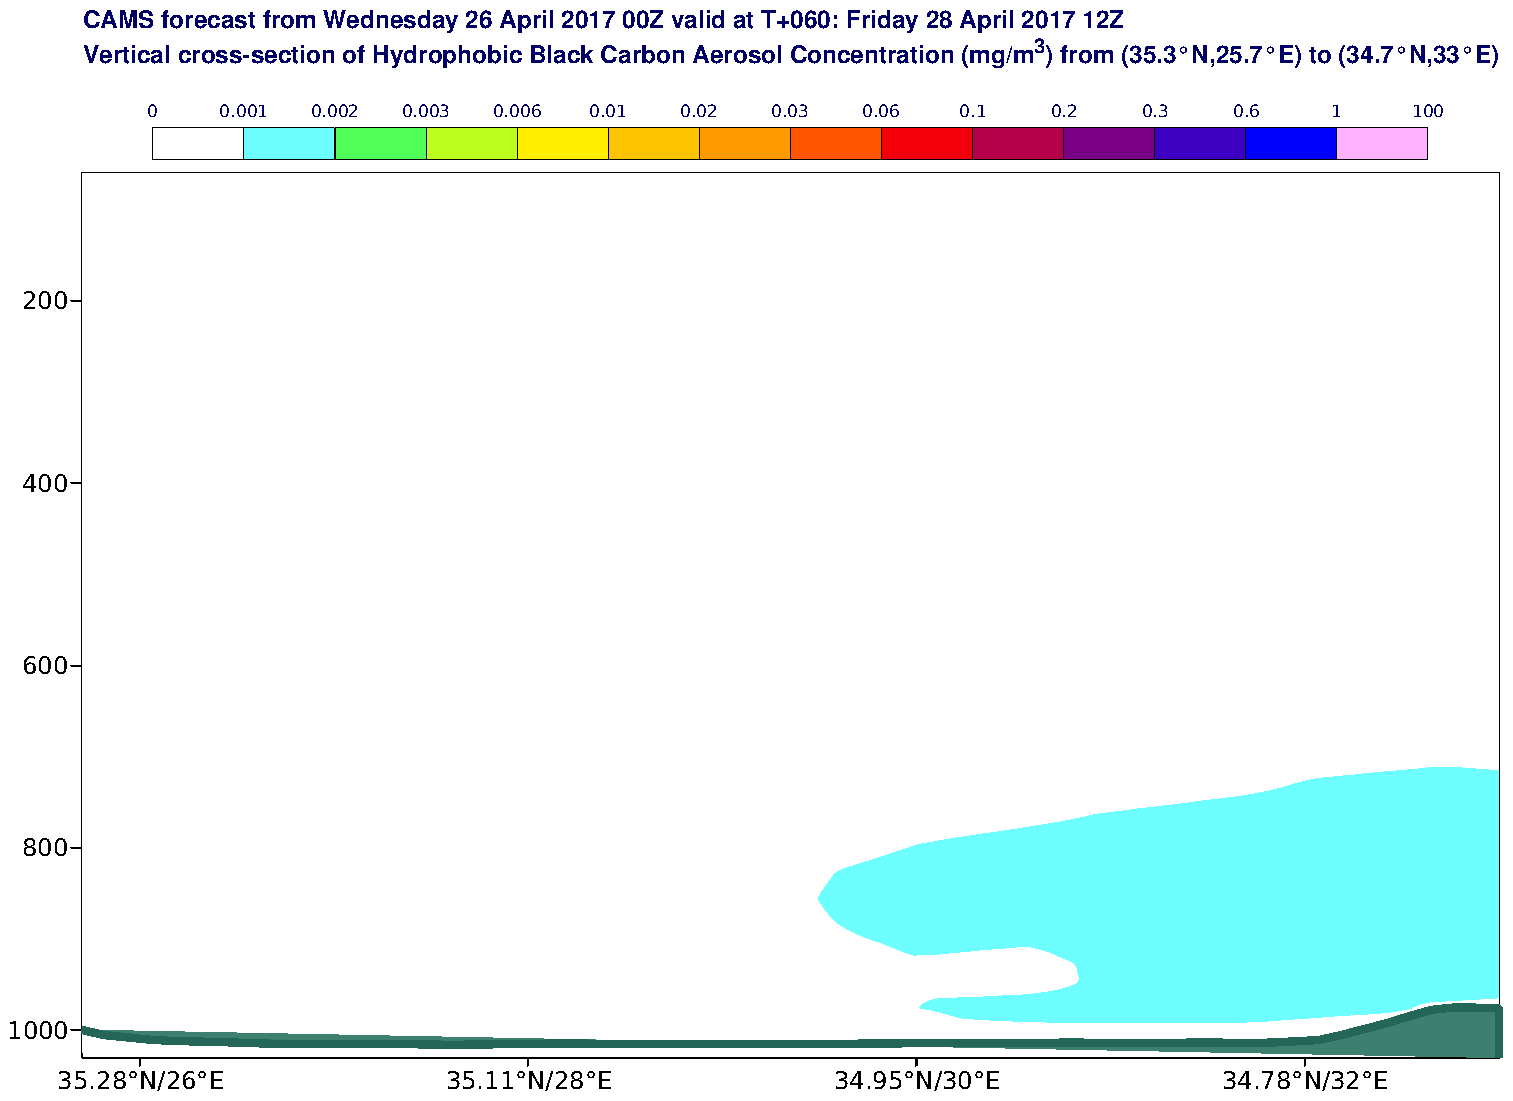 Vertical cross-section of Hydrophobic Black Carbon Aerosol Concentration (mg/m3) valid at T60 - 2017-04-28 12:00